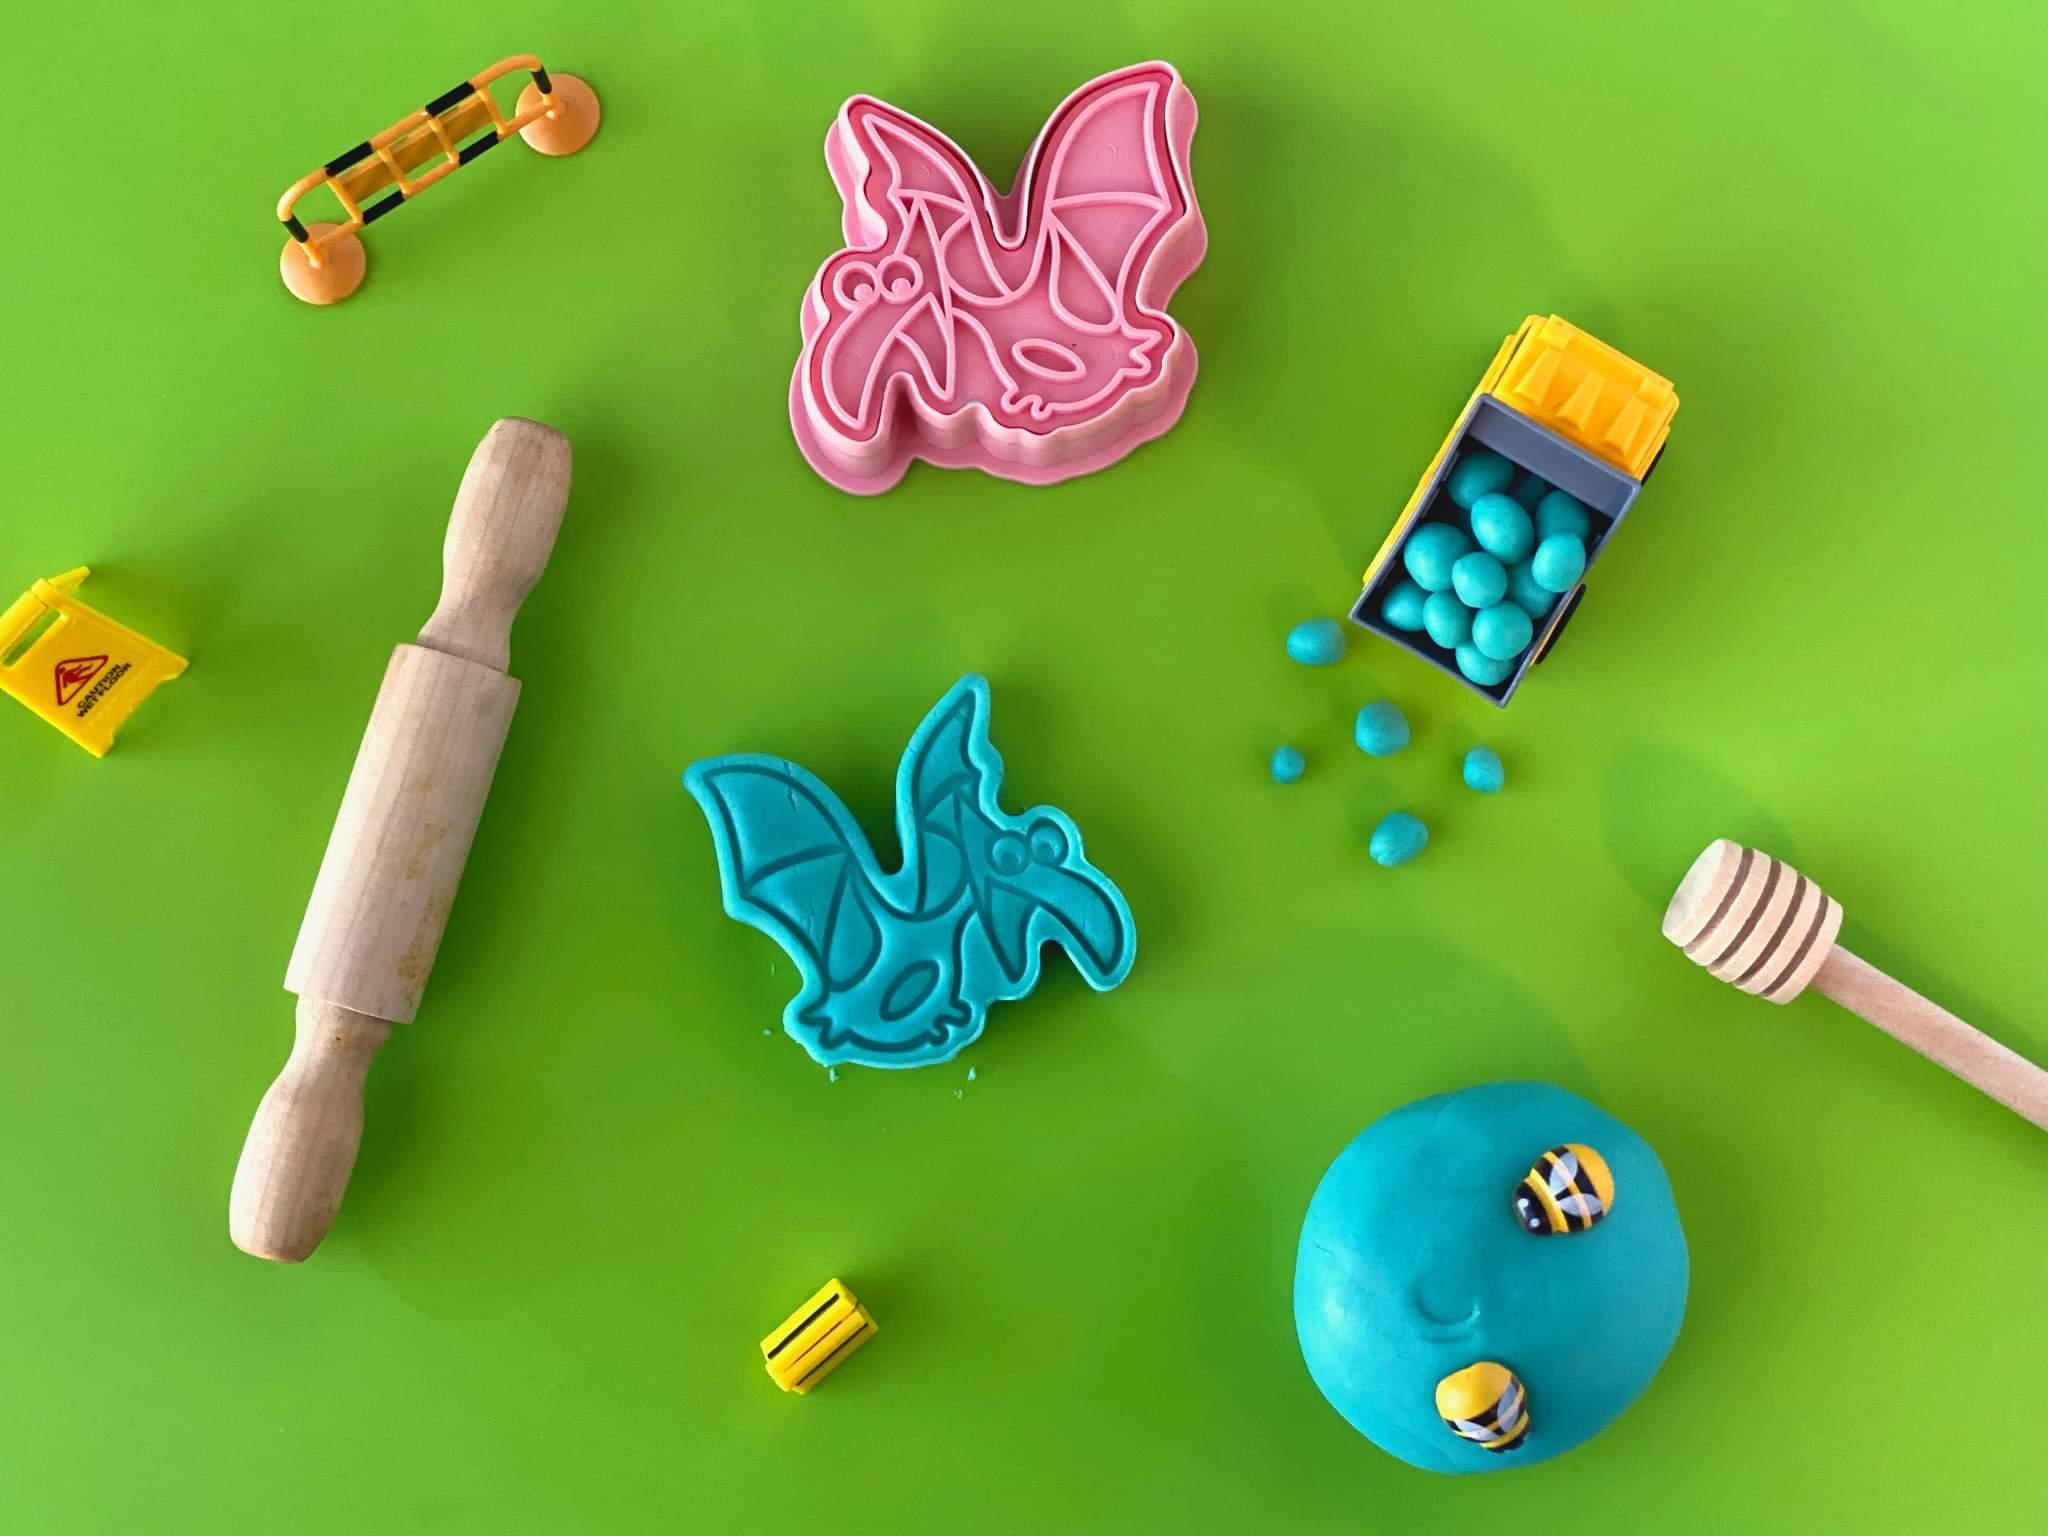 Miscellaneous Playdoh Tools/cutters/molds